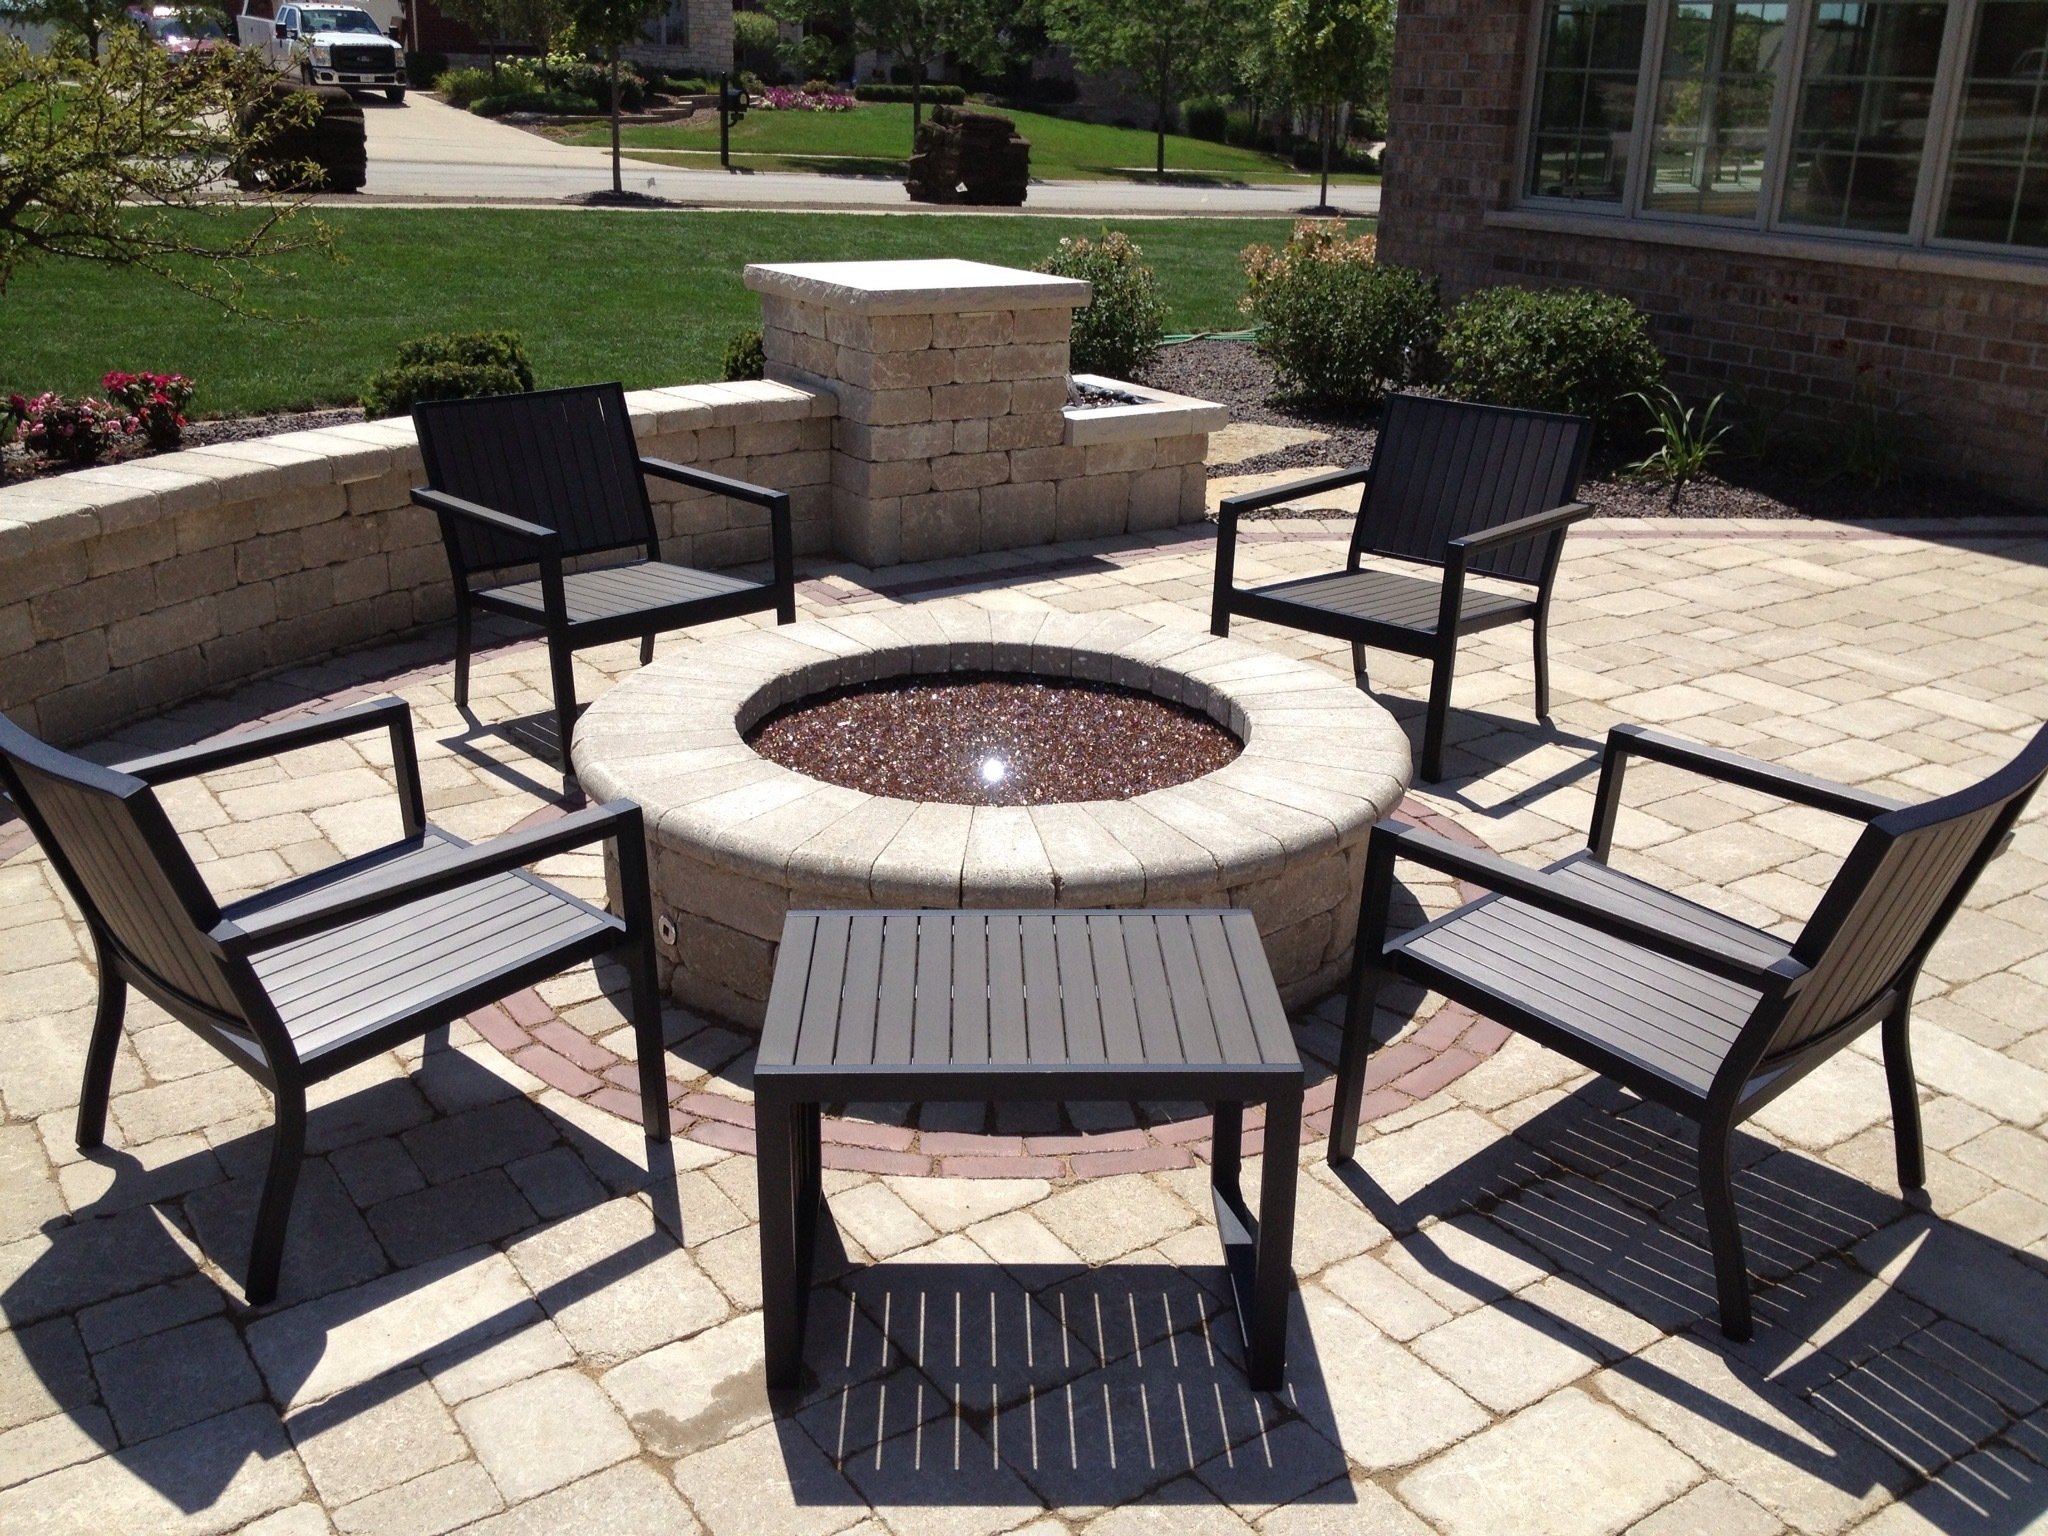 With cool spring nights lingering around, it's a great time to enjoy the warmth of a natural gas fire pit. Invite neighbors and passersby to admire the elegance of your outdoor oasis.